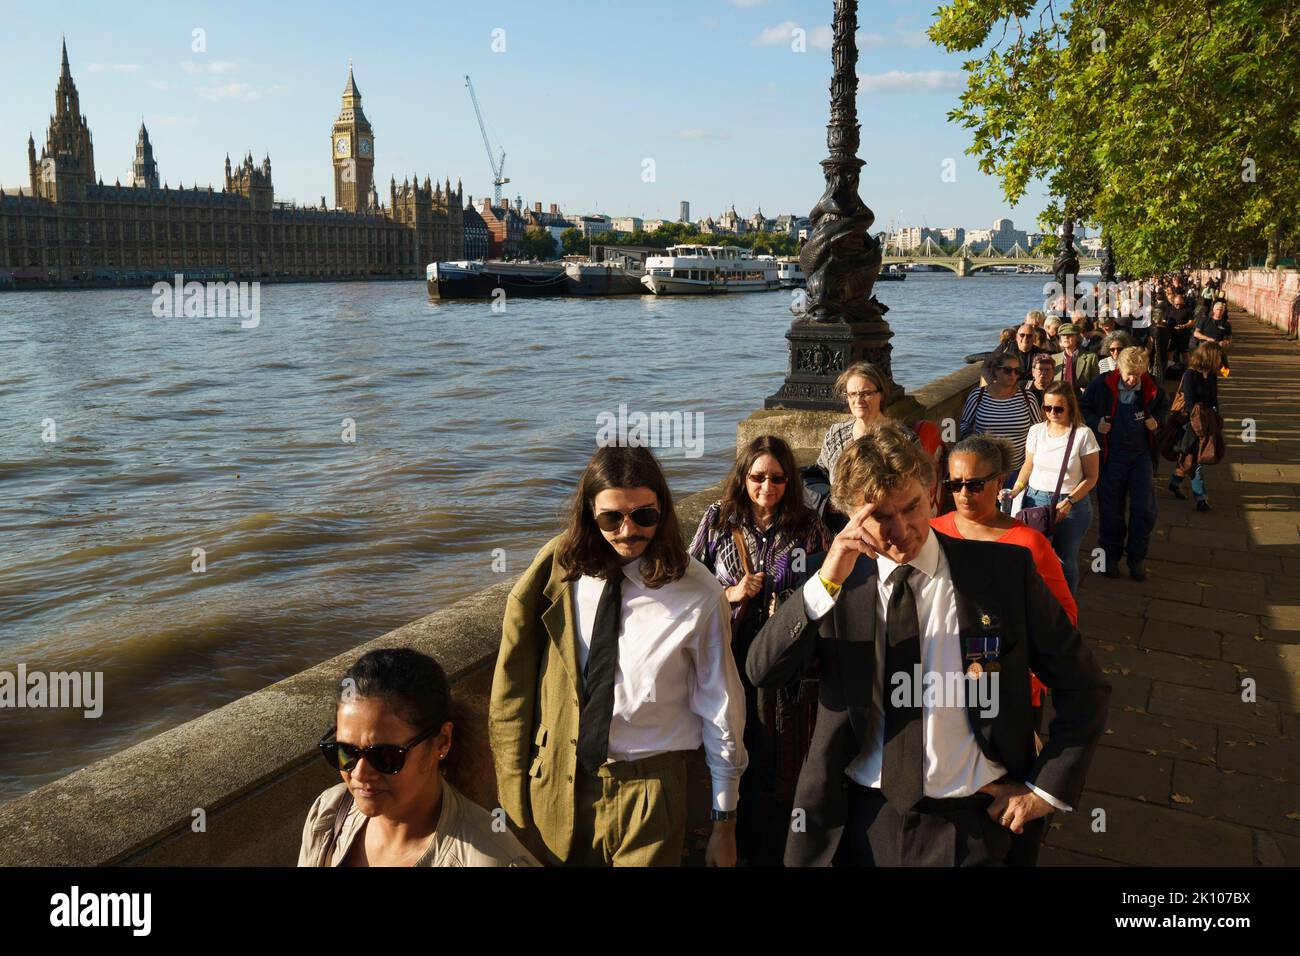 LONDON - SEPTEMBER 14: Members of the public queue along the Albert Embankment, to go int to the Westminster Hall to view the coffin of Queen Elizabeth Ii, which is lying in state. on September 14, 2022. Photo by David Levenson Credit: David Levenson/Alamy Live News Stock Photo